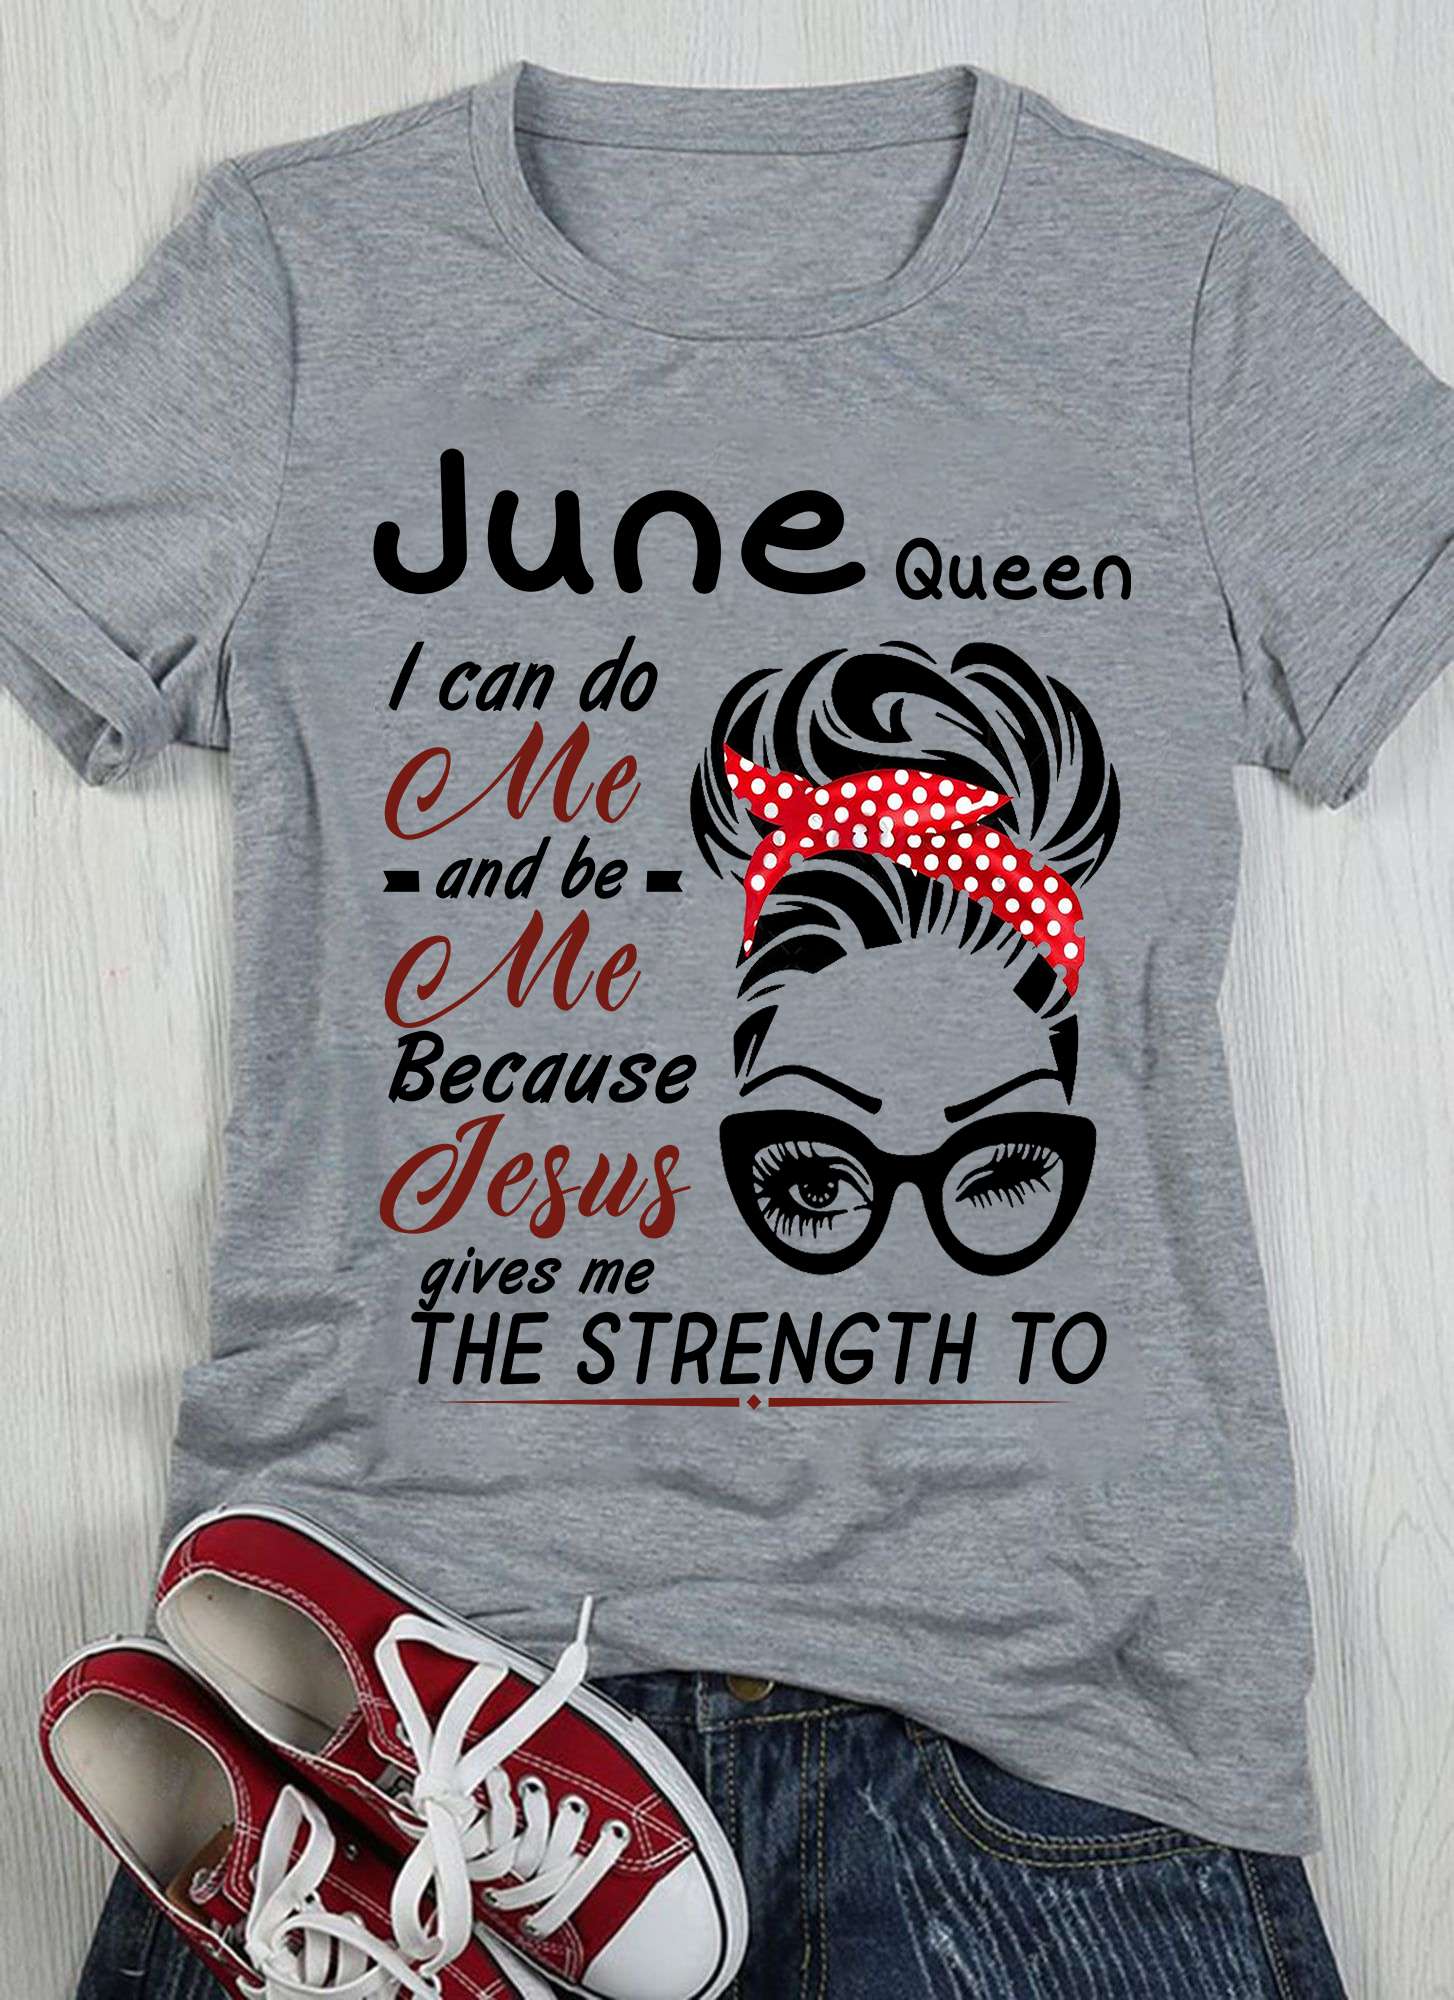 June queen I can do me and be me because Jesus gives me the strength to - Jesus the god